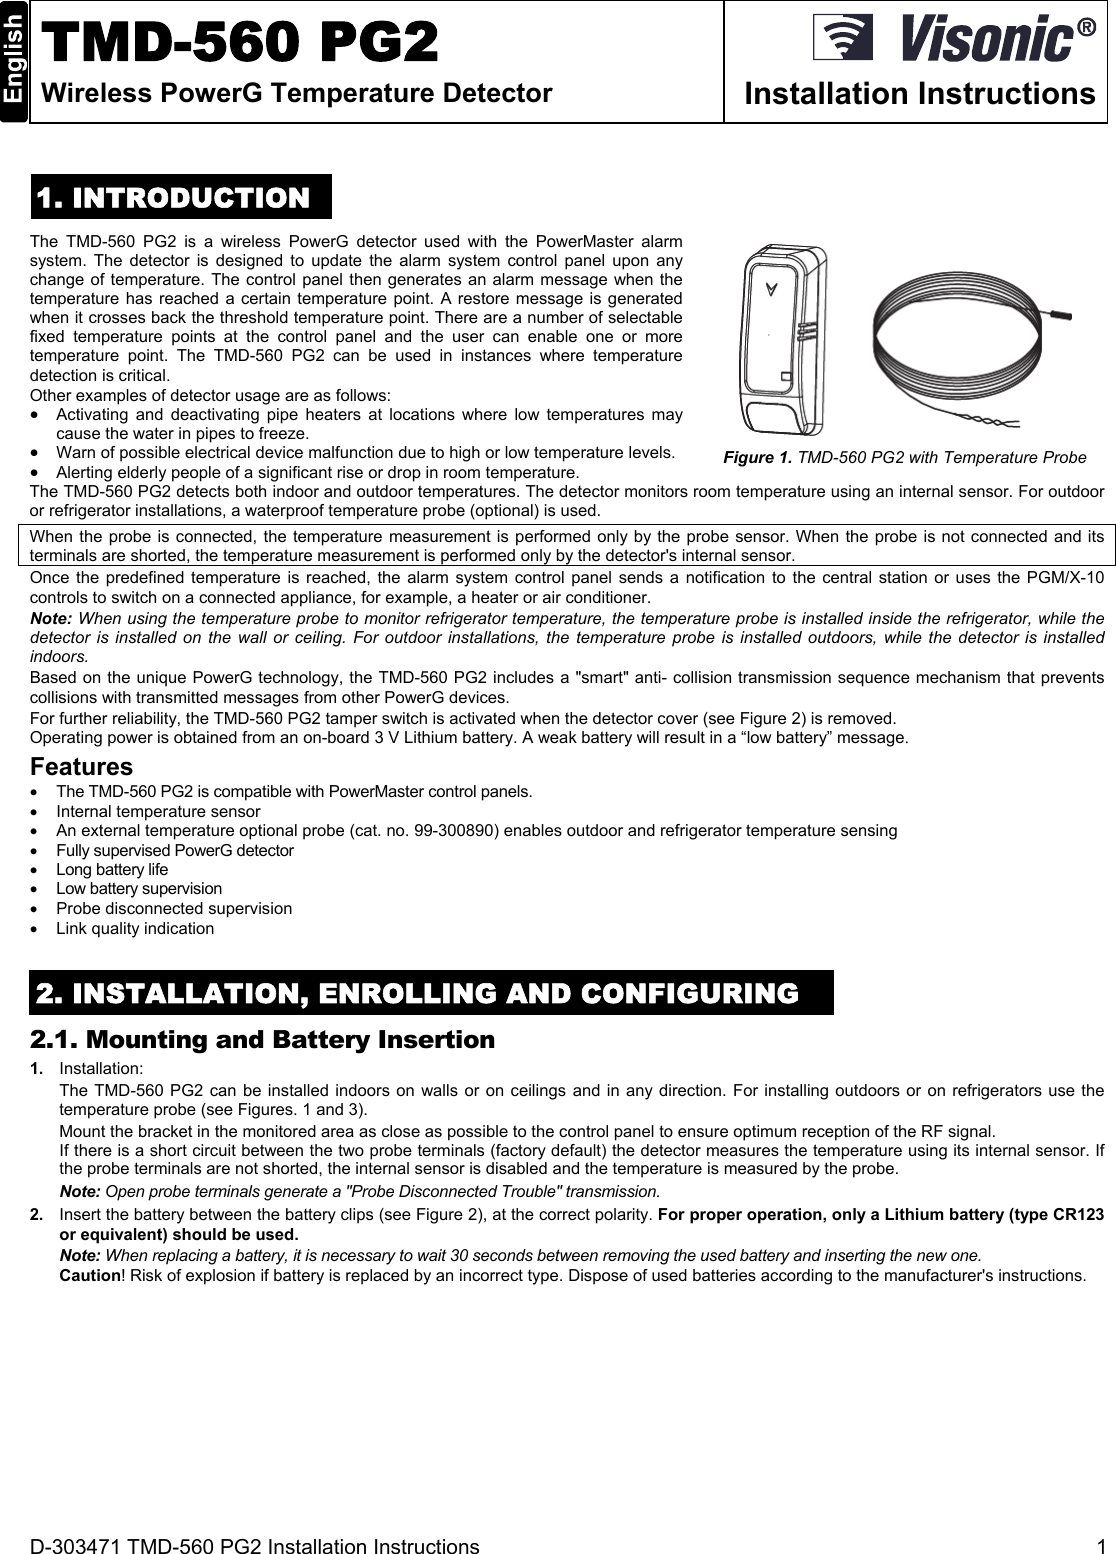 D-303471 TMD-560 PG2 Installation Instructions  1  TMD-560 PG2 Wireless PowerG Temperature Detector  Installation Instructions 1. INTRODUCTION The TMD-560 PG2 is a wireless PowerG detector used with the PowerMaster alarm system. The detector is designed to update the alarm system control panel upon any change of temperature. The control panel then generates an alarm message when the temperature has reached a certain temperature point. A restore message is generated when it crosses back the threshold temperature point. There are a number of selectable fixed temperature points at the control panel and the user can enable one or more temperature point. The TMD-560 PG2 can be used in instances where temperature detection is critical. Other examples of detector usage are as follows:   Activating and deactivating pipe heaters at locations where low temperatures may cause the water in pipes to freeze.   Warn of possible electrical device malfunction due to high or low temperature levels.    Alerting elderly people of a significant rise or drop in room temperature. Figure 1. TMD-560 PG2 with Temperature Probe The TMD-560 PG2 detects both indoor and outdoor temperatures. The detector monitors room temperature using an internal sensor. For outdoor or refrigerator installations, a waterproof temperature probe (optional) is used.  When the probe is connected, the temperature measurement is performed only by the probe sensor. When the probe is not connected and its terminals are shorted, the temperature measurement is performed only by the detector&apos;s internal sensor. Once the predefined temperature is reached, the alarm system control panel sends a notification to the central station or uses the PGM/X-10 controls to switch on a connected appliance, for example, a heater or air conditioner. Note: When using the temperature probe to monitor refrigerator temperature, the temperature probe is installed inside the refrigerator, while the detector is installed on the wall or ceiling. For outdoor installations, the temperature probe is installed outdoors, while the detector is installed indoors. Based on the unique PowerG technology, the TMD-560 PG2 includes a &quot;smart&quot; anti- collision transmission sequence mechanism that prevents collisions with transmitted messages from other PowerG devices.  For further reliability, the TMD-560 PG2 tamper switch is activated when the detector cover (see Figure 2) is removed. Operating power is obtained from an on-board 3 V Lithium battery. A weak battery will result in a “low battery” message. Features   The TMD-560 PG2 is compatible with PowerMaster control panels.   Internal temperature sensor   An external temperature optional probe (cat. no. 99-300890) enables outdoor and refrigerator temperature sensing   Fully supervised PowerG detector   Long battery life   Low battery supervision  Probe disconnected supervision   Link quality indication 2. INSTALLATION, ENROLLING AND CONFIGURING 2.1. Mounting and Battery Insertion 1.  Installation: The TMD-560 PG2 can be installed indoors on walls or on ceilings and in any direction. For installing outdoors or on refrigerators use the temperature probe (see Figures. 1 and 3). Mount the bracket in the monitored area as close as possible to the control panel to ensure optimum reception of the RF signal. If there is a short circuit between the two probe terminals (factory default) the detector measures the temperature using its internal sensor. If the probe terminals are not shorted, the internal sensor is disabled and the temperature is measured by the probe.  Note: Open probe terminals generate a &quot;Probe Disconnected Trouble&quot; transmission. 2.  Insert the battery between the battery clips (see Figure 2), at the correct polarity. For proper operation, only a Lithium battery (type CR123 or equivalent) should be used. Note: When replacing a battery, it is necessary to wait 30 seconds between removing the used battery and inserting the new one. Caution! Risk of explosion if battery is replaced by an incorrect type. Dispose of used batteries according to the manufacturer&apos;s instructions.  